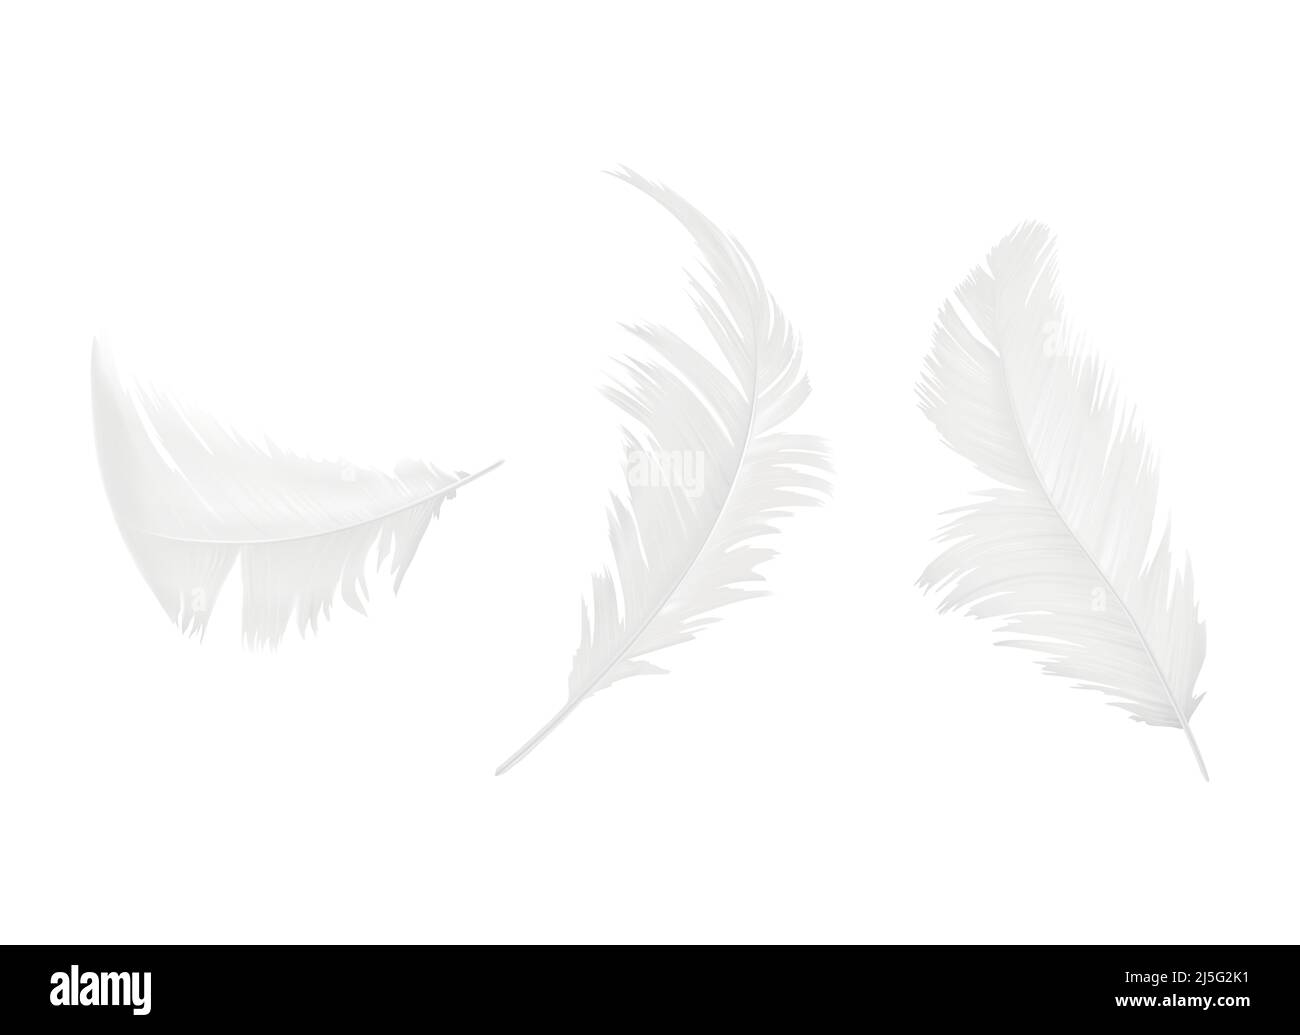 Vector realistic 3d set of white bird or angel feathers in various shapes, isolated on background. Symbol of lightness, innocence, heaven, literature Stock Vector